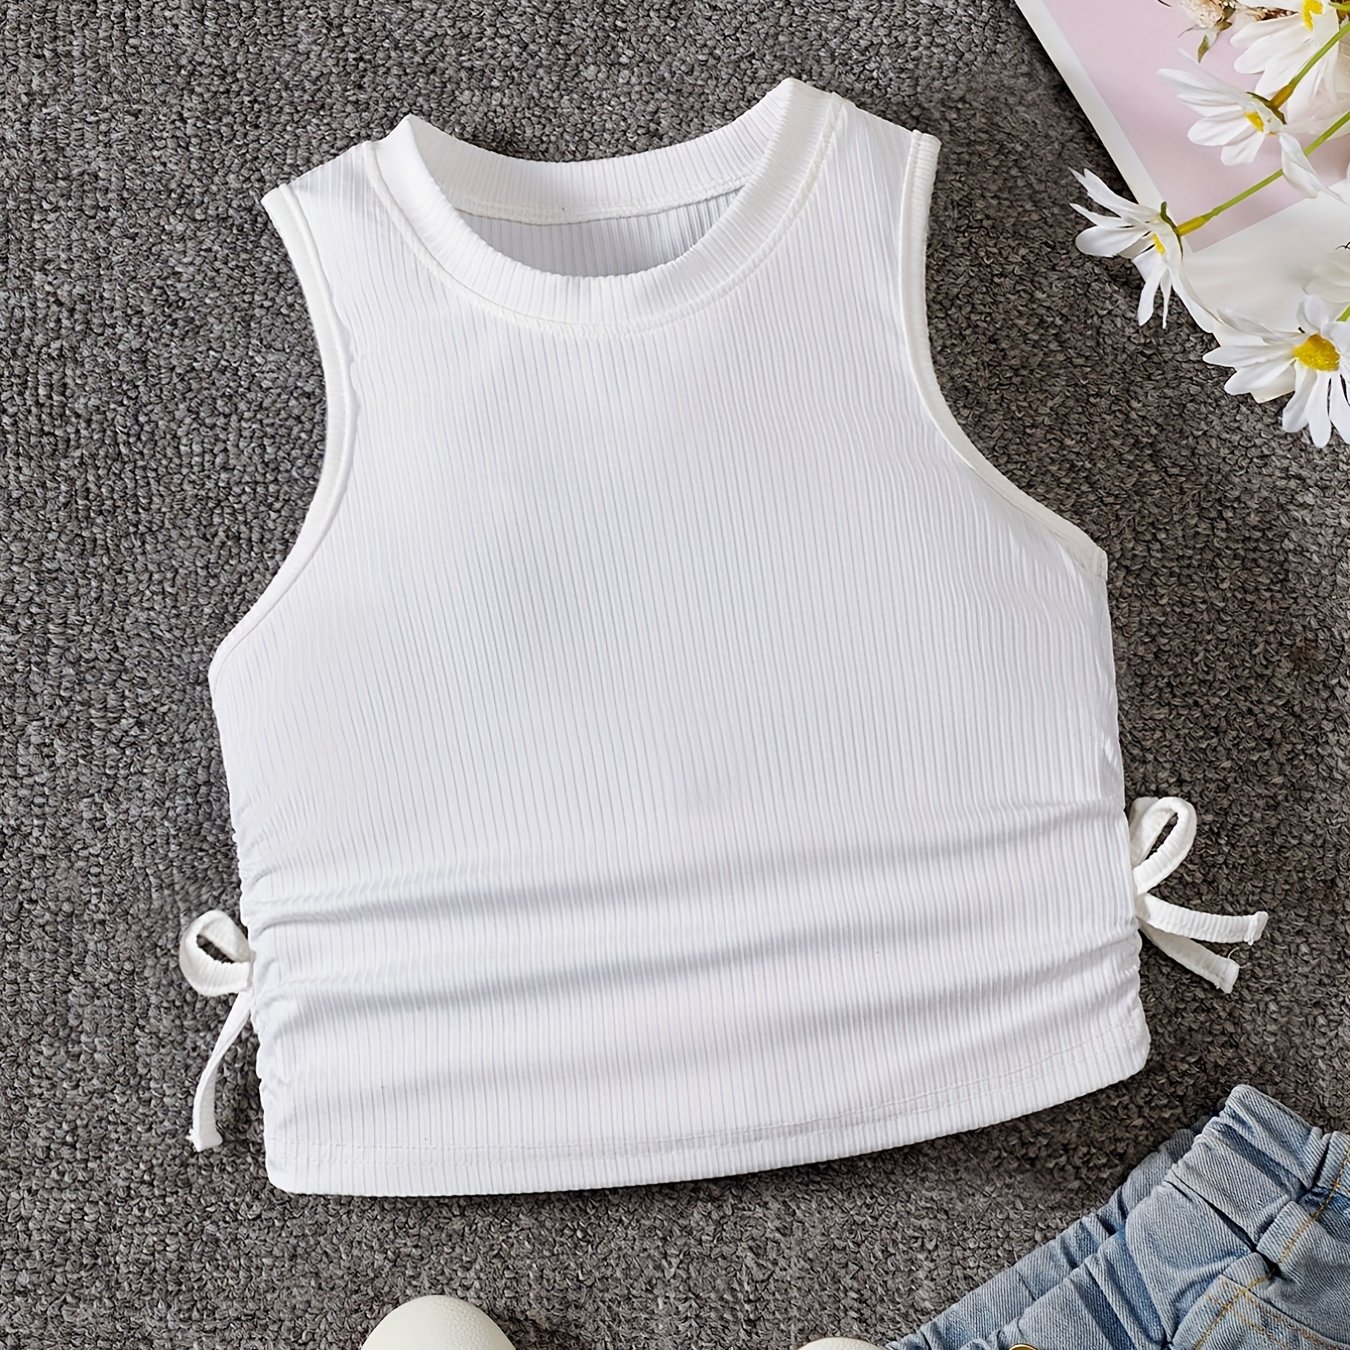 fvwitlyh Grey White Tank Top Women Summer Sleeveless Shirt Ribbed  Drawstring Side Ruched Plus Size Low Cut Tank Top Y2K Scoop Neck Crop Tops  Medium 